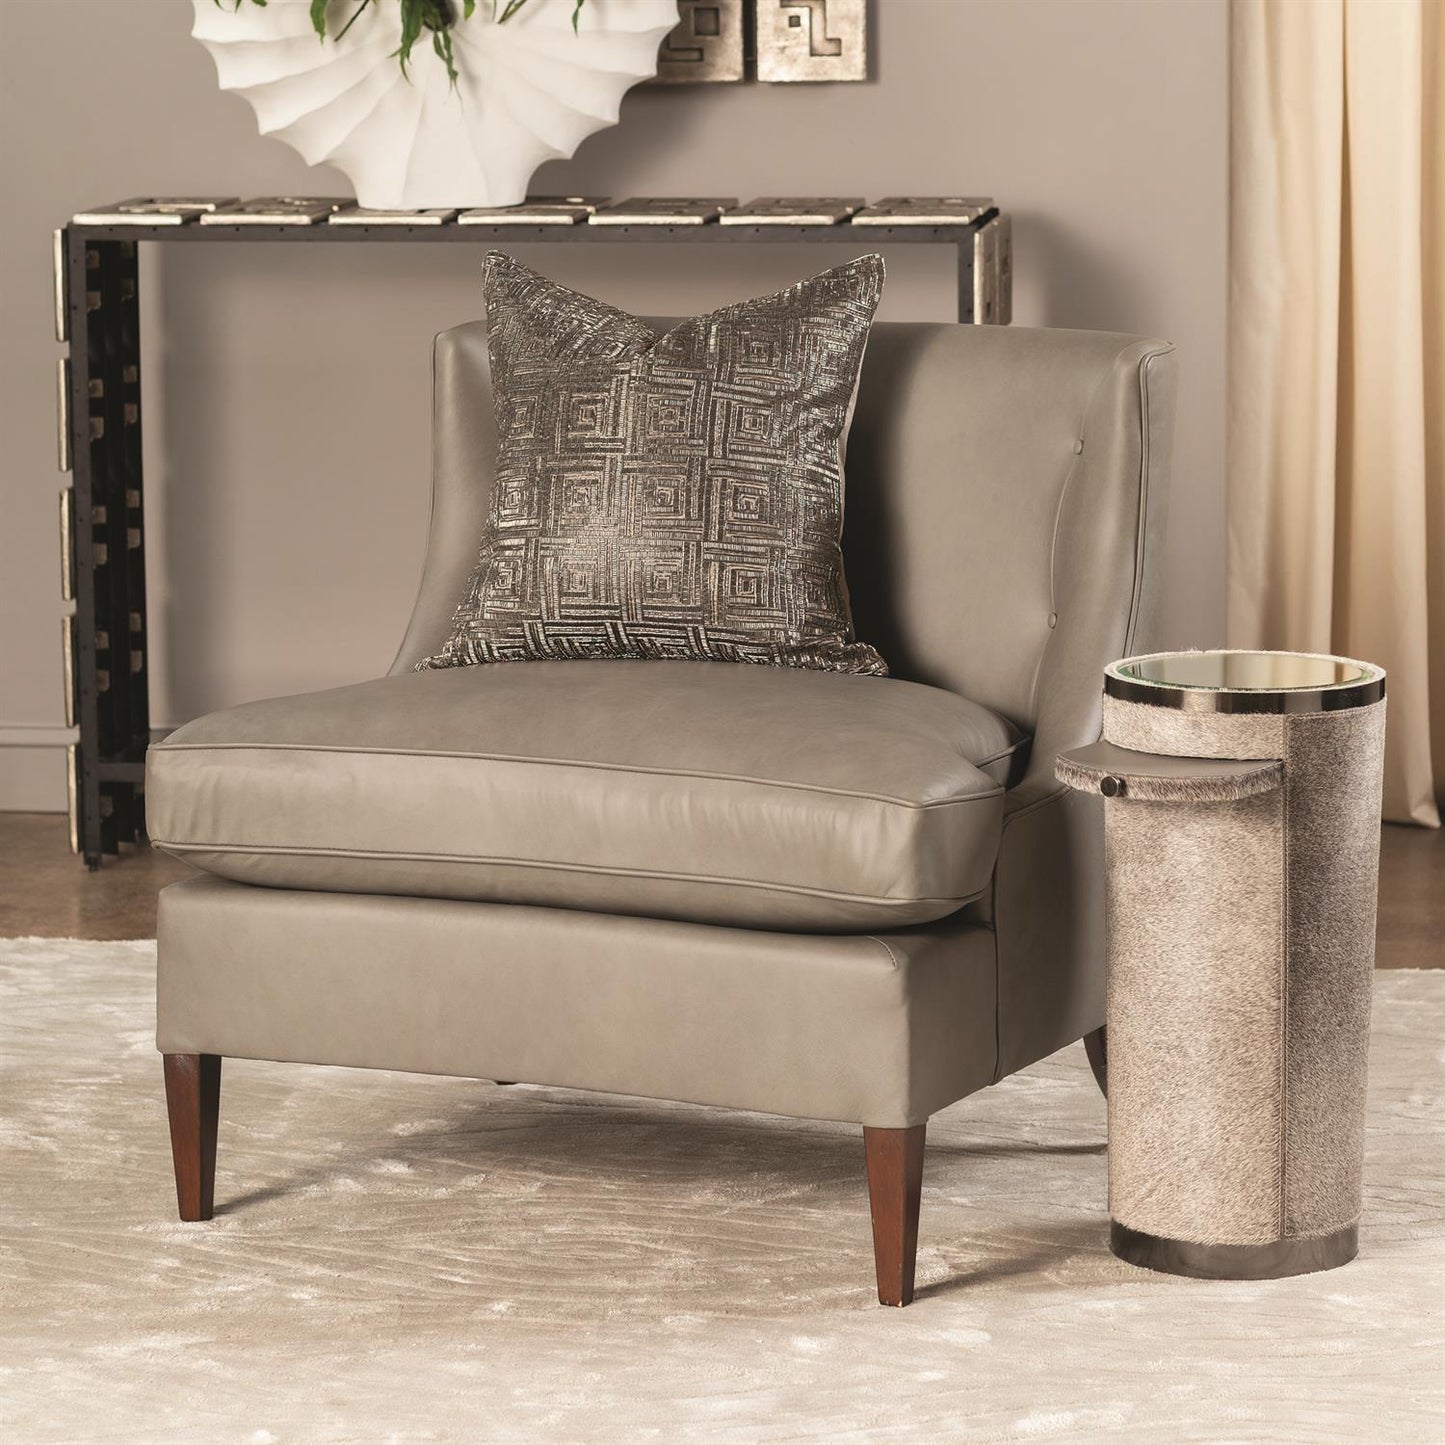 Severn Lounge Chair - Grey Leather